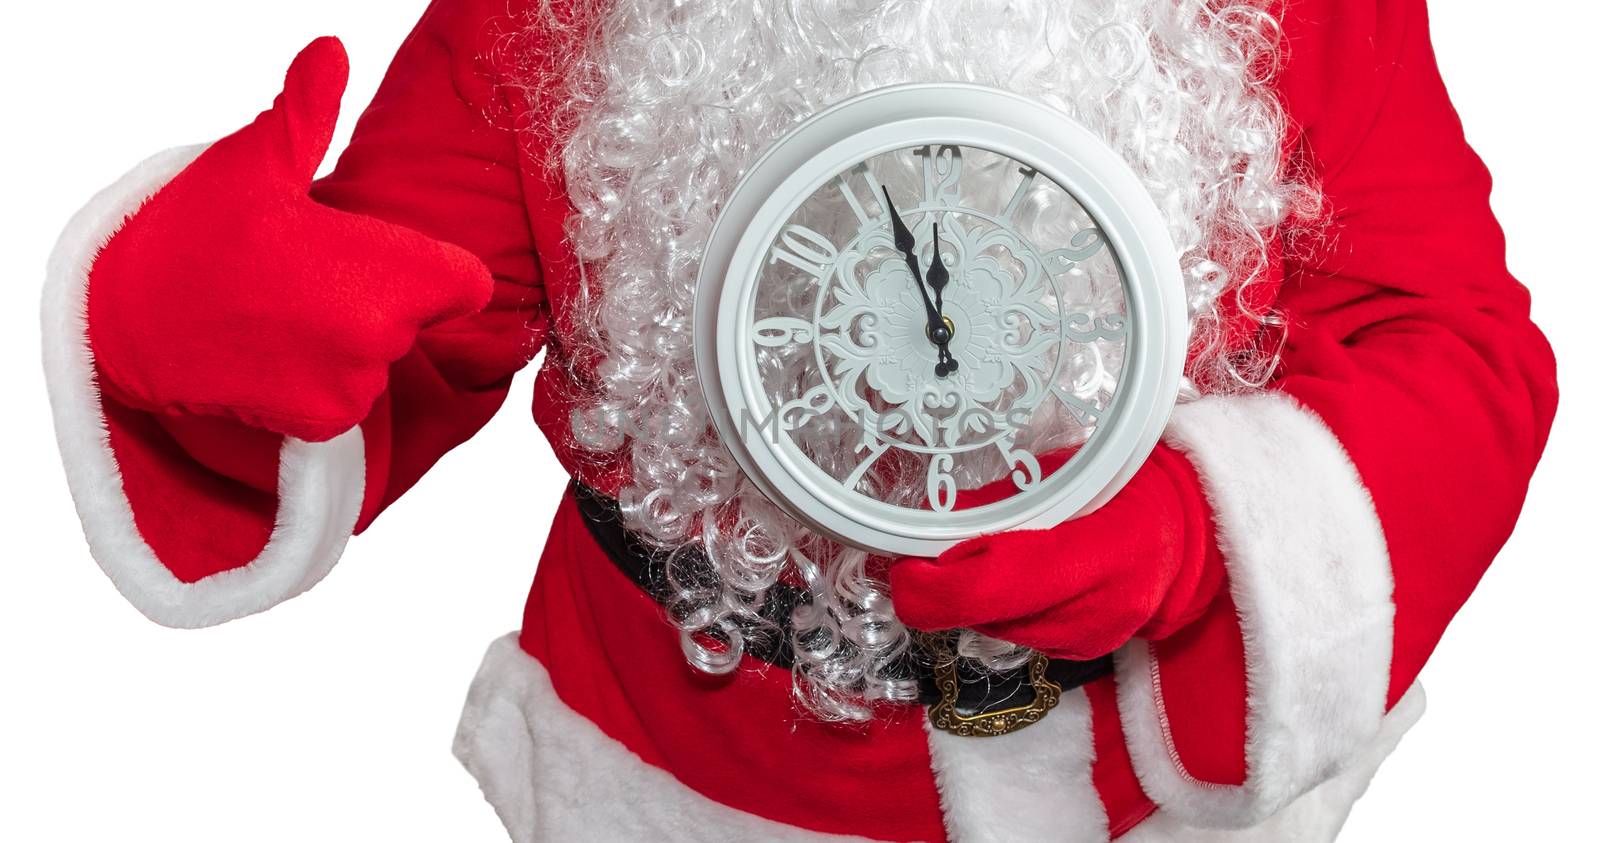 Santa Claus holding a white clock which shows five minutes to midnight and he is pointing at it. New year's eve concept. Isolated on white background.